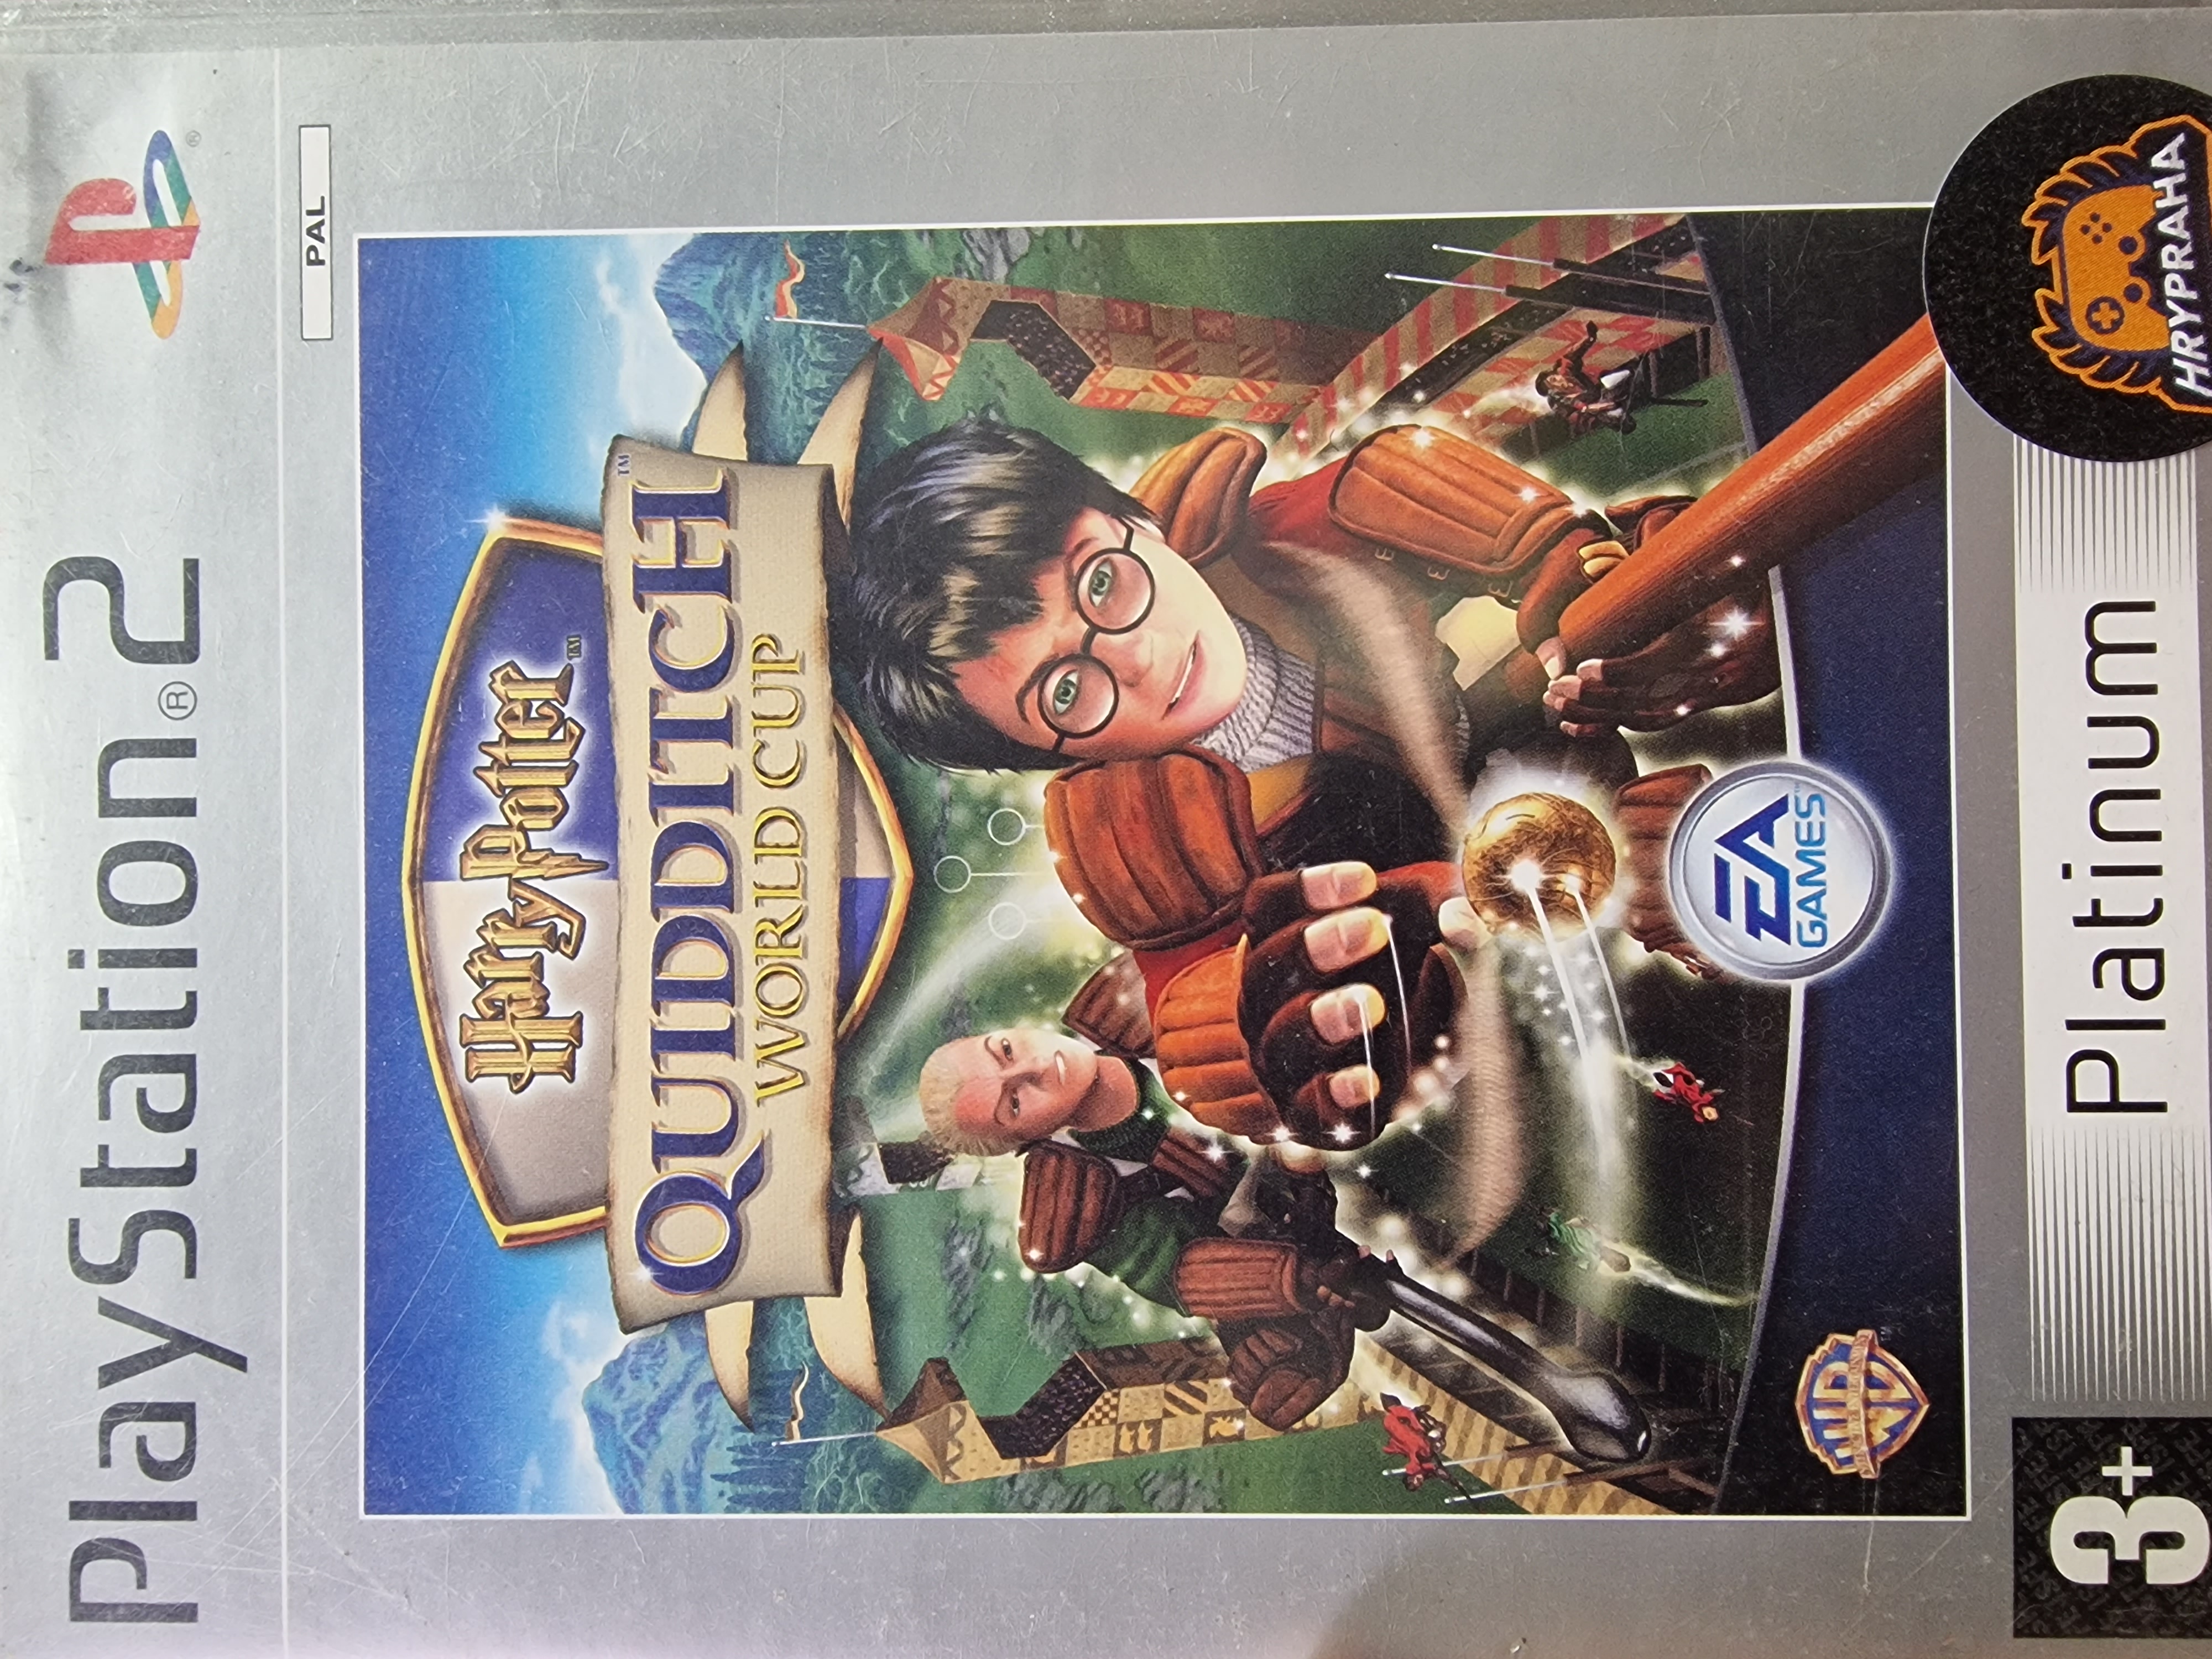 Harry potter Quidditch world cup Ps2 